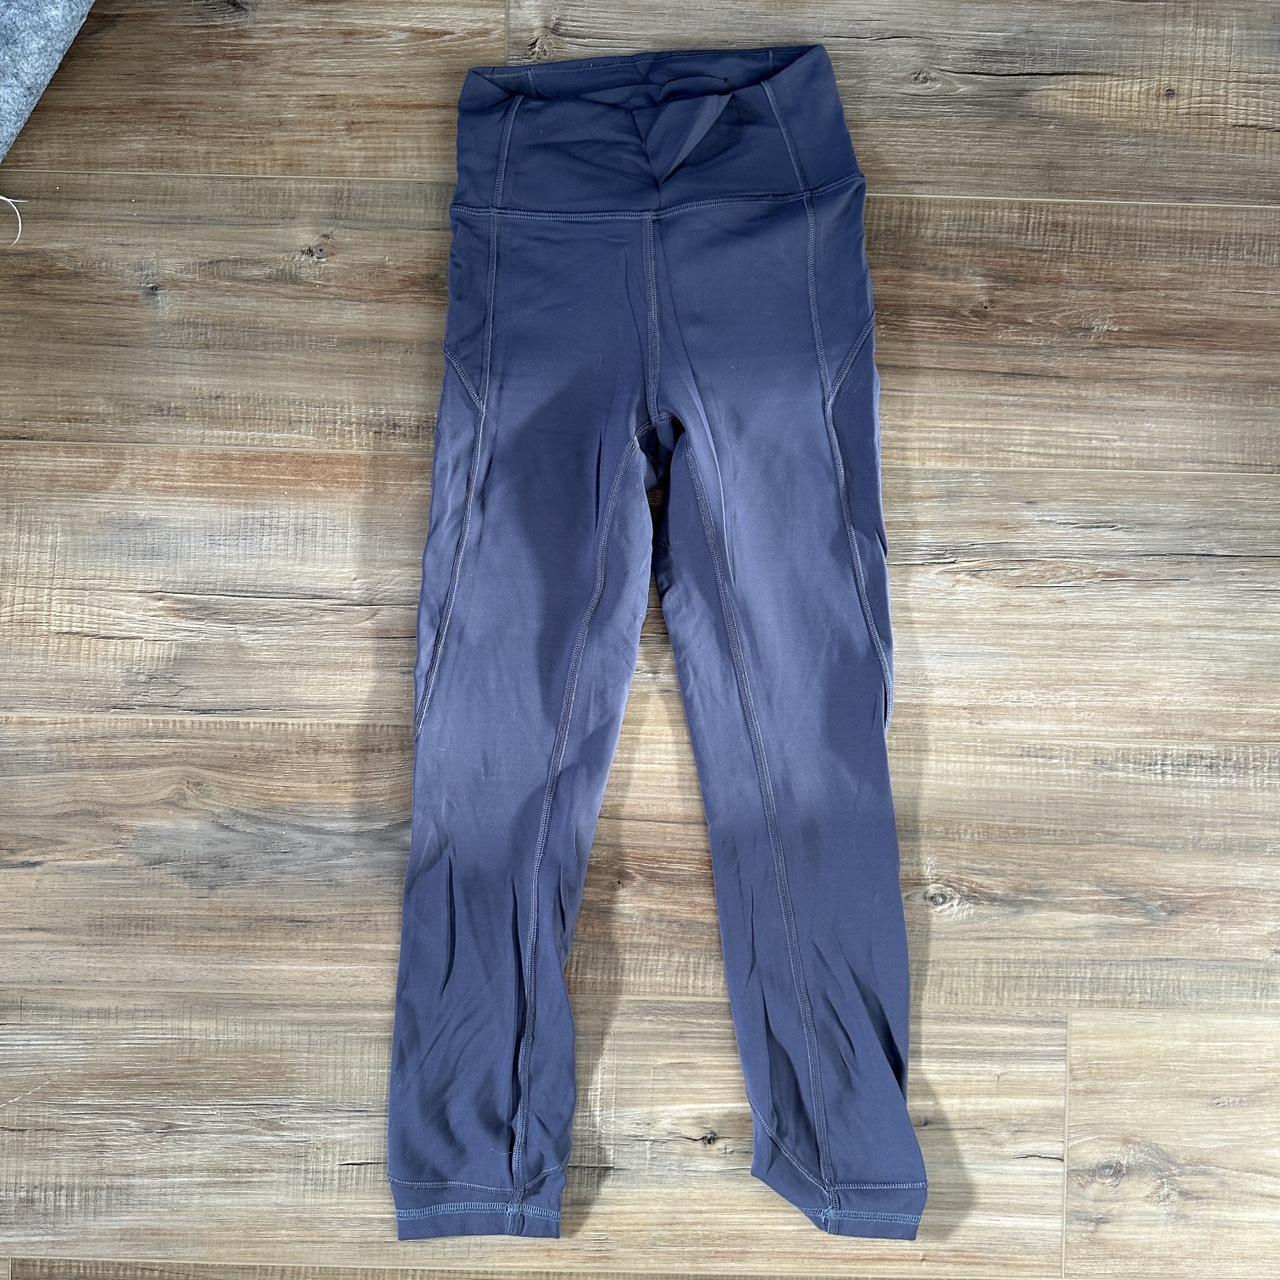 Lululemon Leggings I believe these are the In - Depop